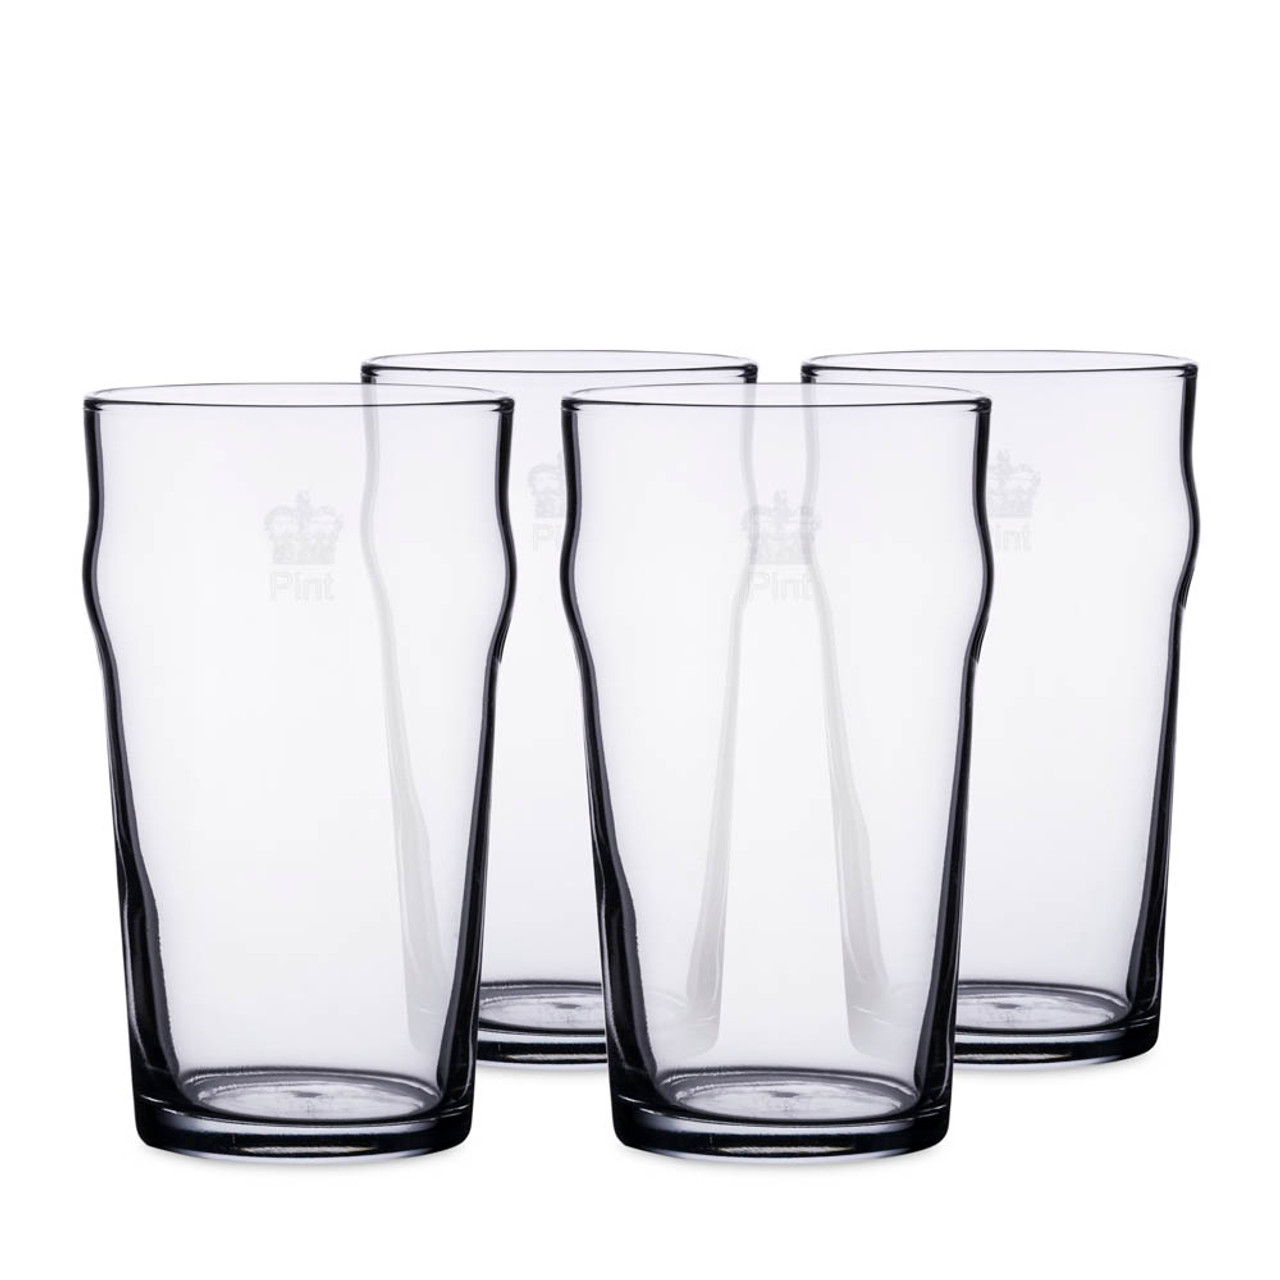 https://cdn11.bigcommerce.com/s-cznxq08r7/images/stencil/1280x1280/products/451/2107/authentic_british_style_imperial_pint_glass_with_etched_seal_-_set_of_4-2__11882.1590765554.jpg?c=1